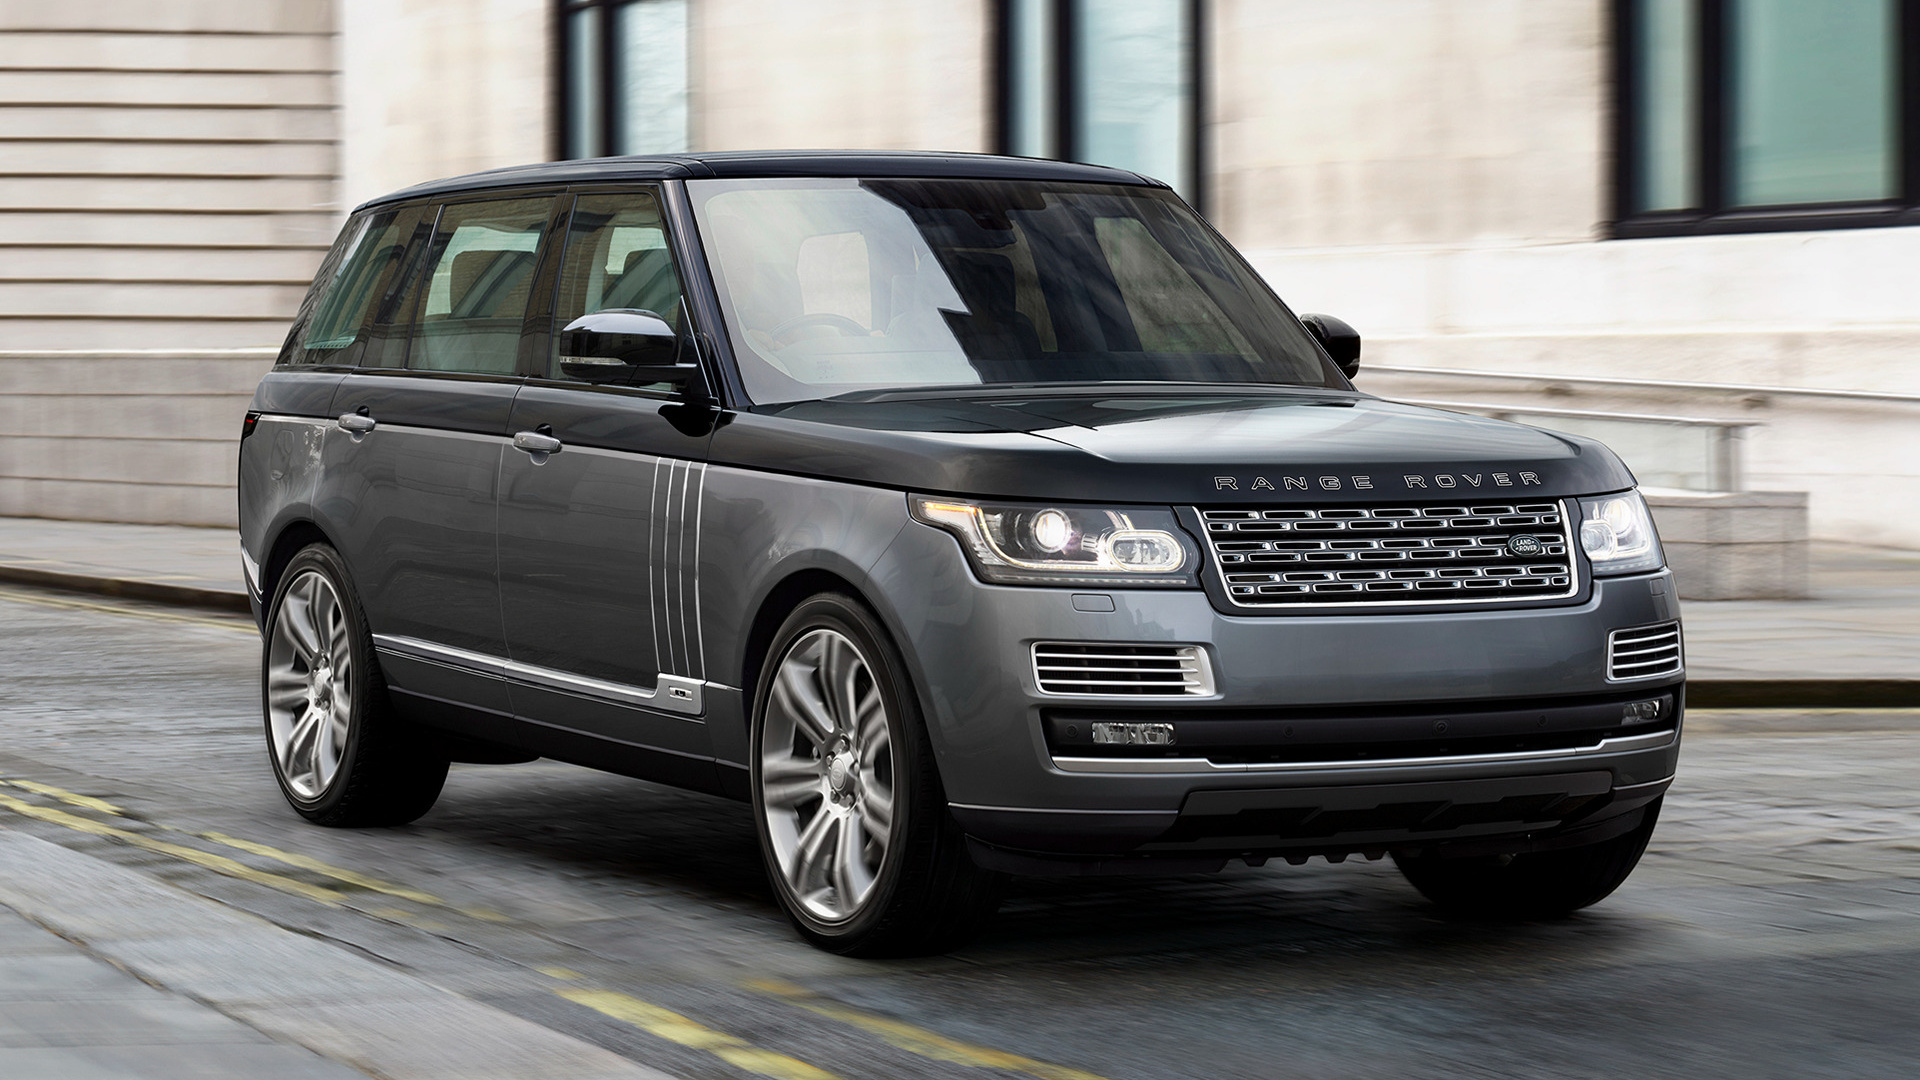 2015 Range Rover SVAutobiography [LWB] (US) - Wallpapers and HD Images ...